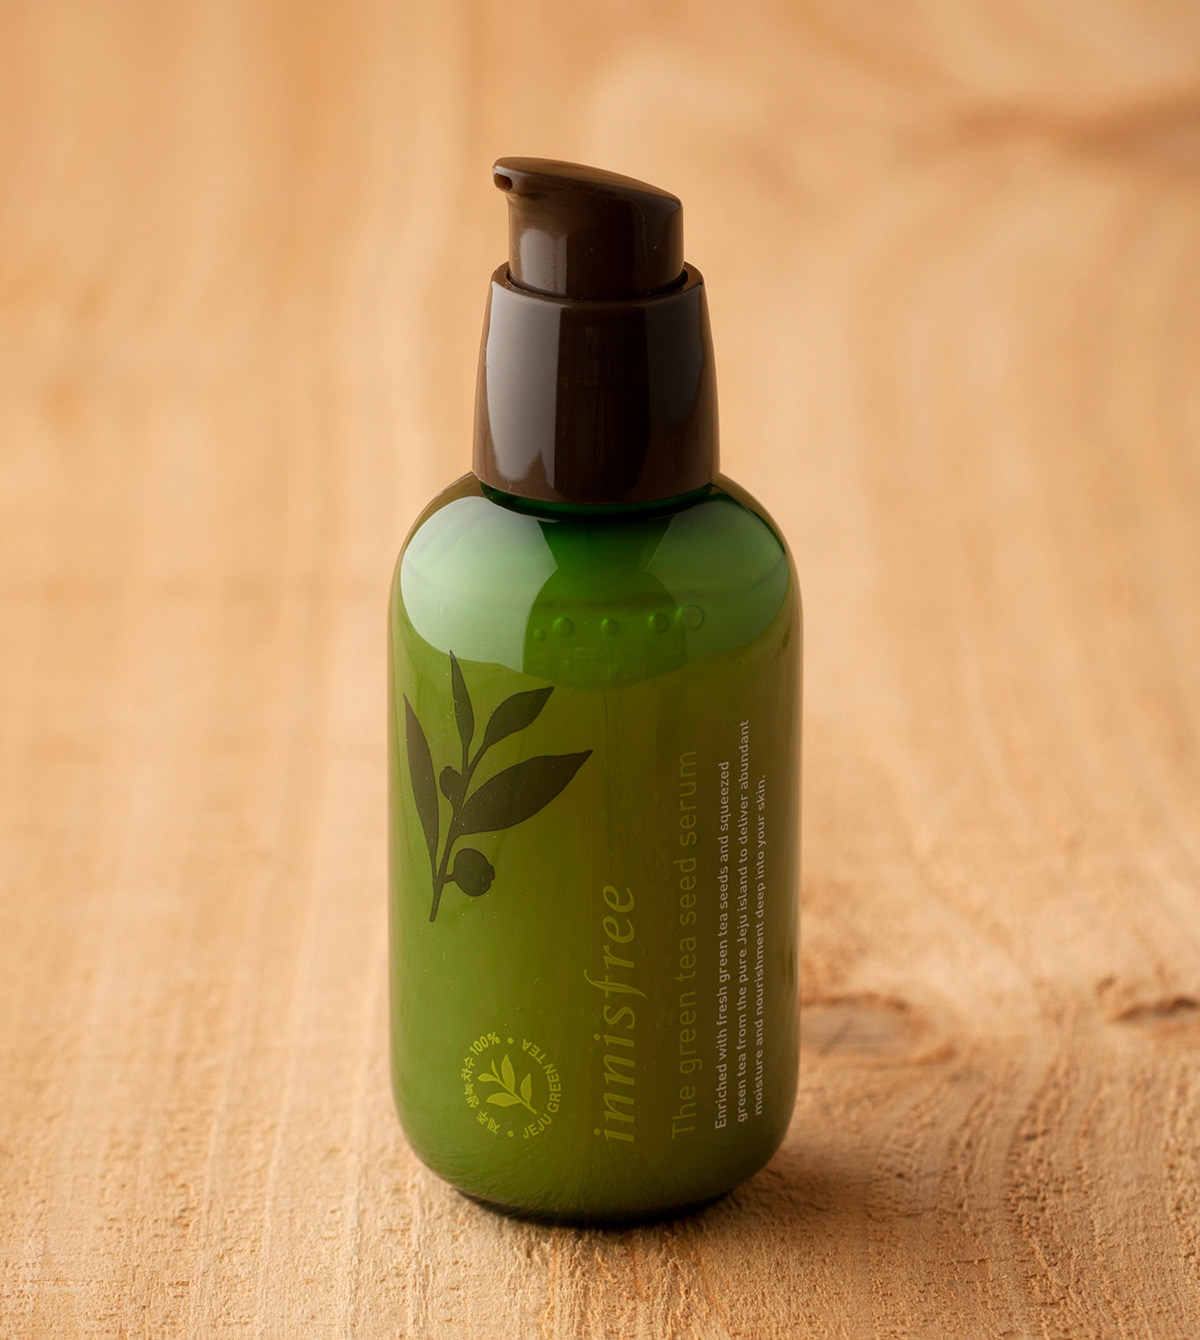 Innisfree The Green Tea Seed Serum - 12 Skin Care Products from Innisfree India to Stock in 2018 - Check out Reviews & Price